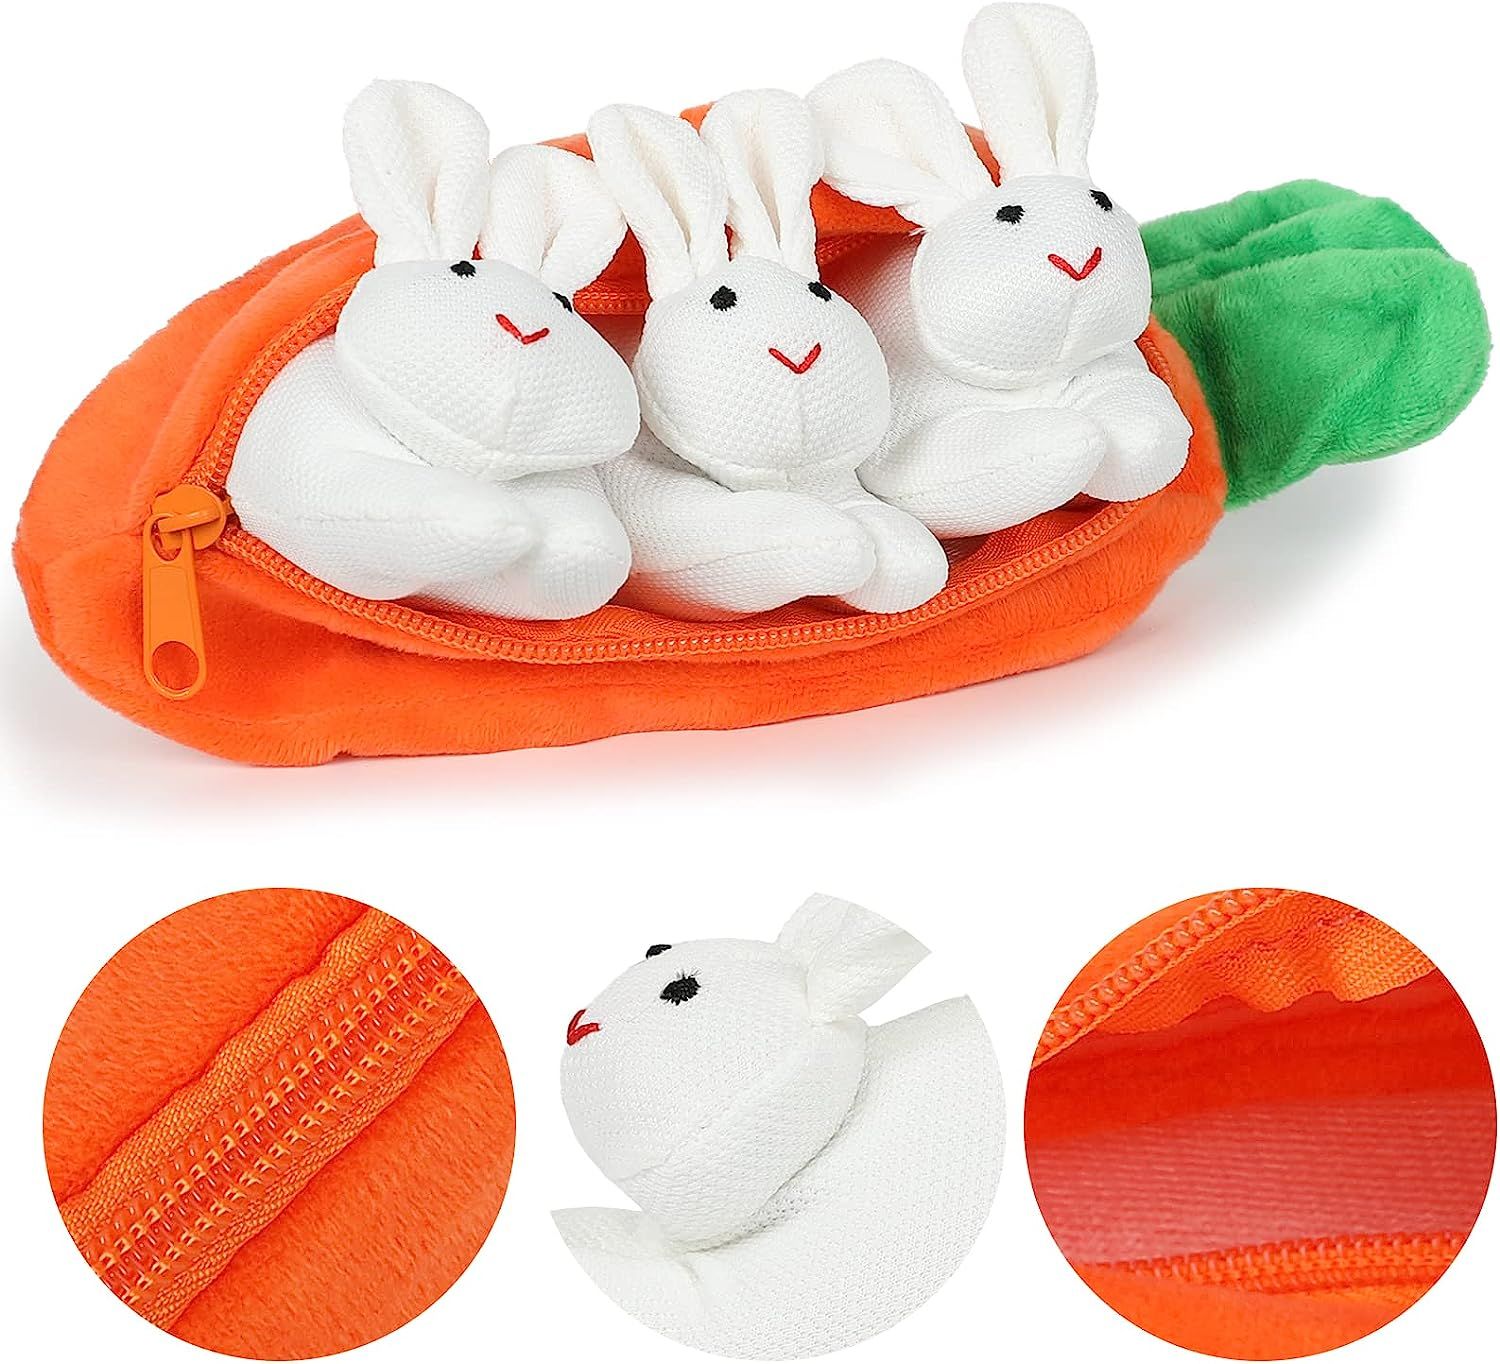 Hide-and-Seek Bunnies in Carrot Pouch, Three Bunnies in a Carrot Purse, Unzip The Rabbit Doll Toy... | Amazon (US)